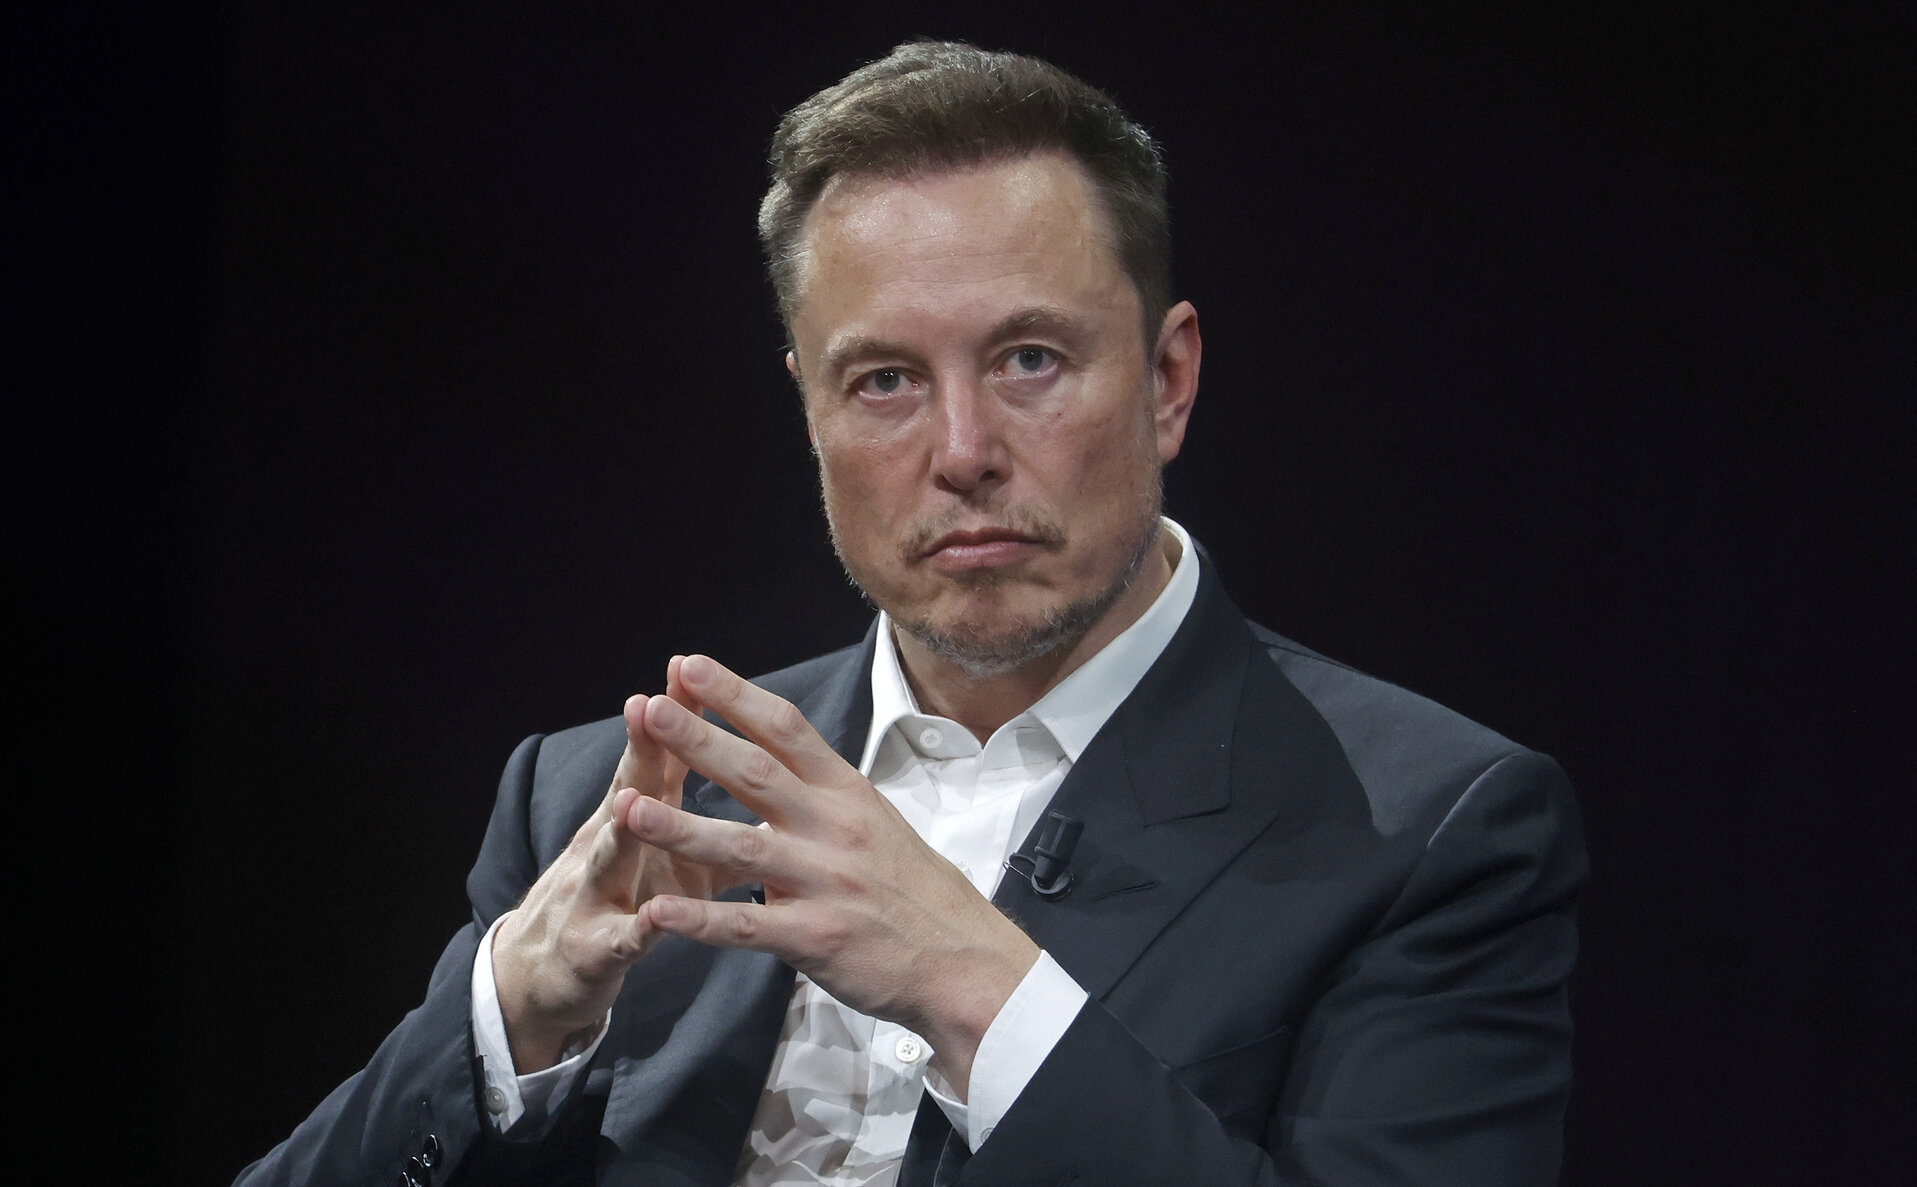 ‘Unfiltered and untethered’: Key takeaways about Elon Musk from the Walter Isaacson biography